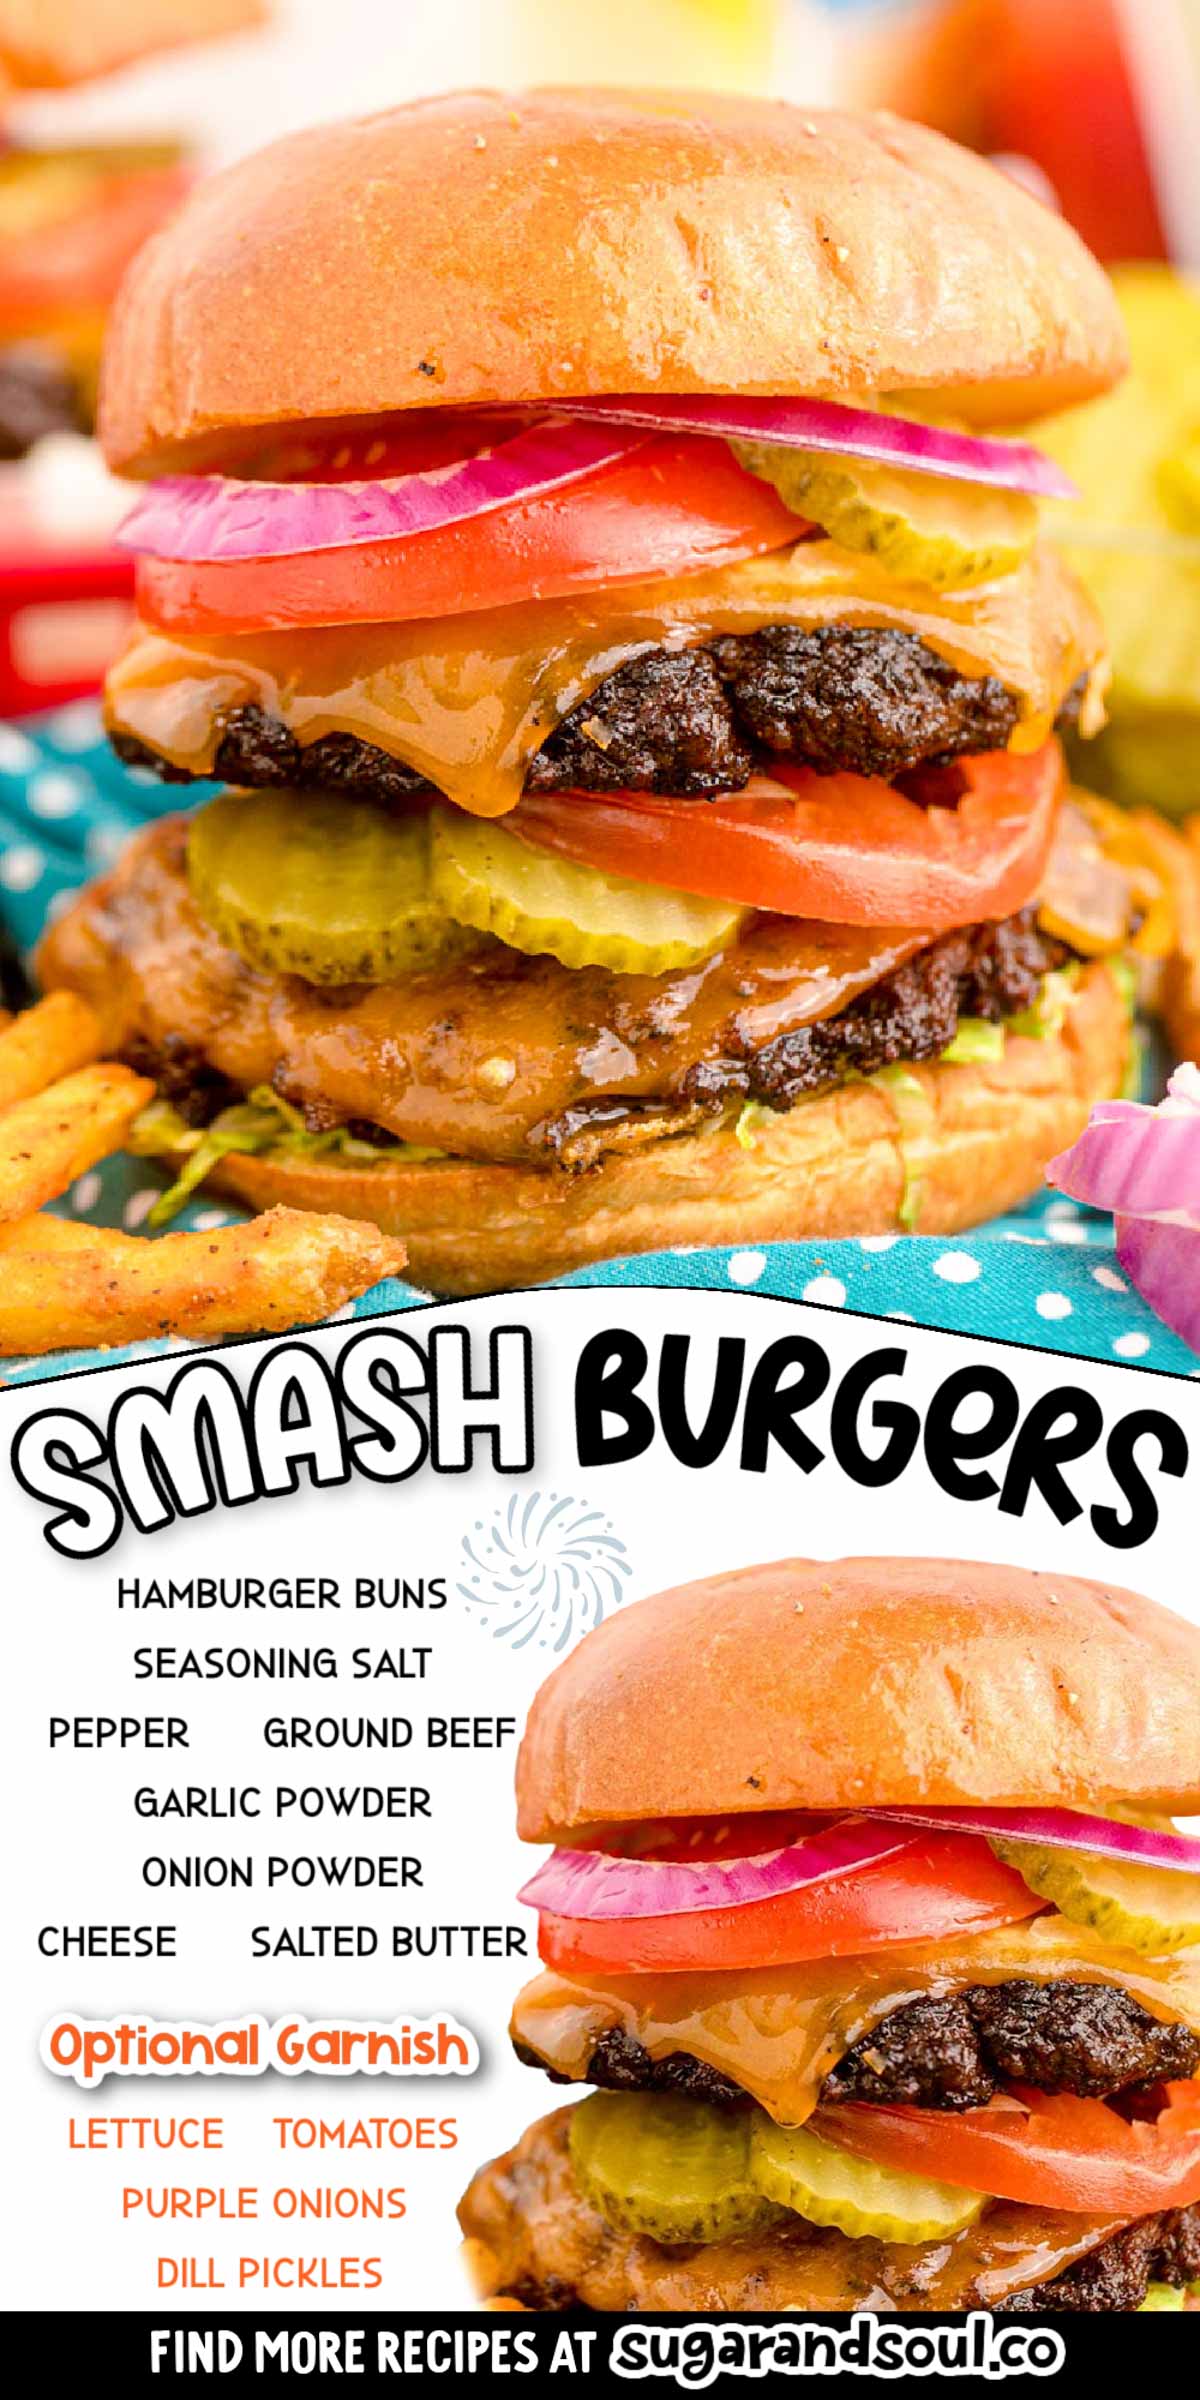 Homemade Smash Burgers are juicy burgers that are smashed down onto a hot cast iron frying pan to deliver deliciously caramelized burgers! These easy-to-make burgers are ready to be introduced to your taste buds in just 35 minutes! via @sugarandsoulco